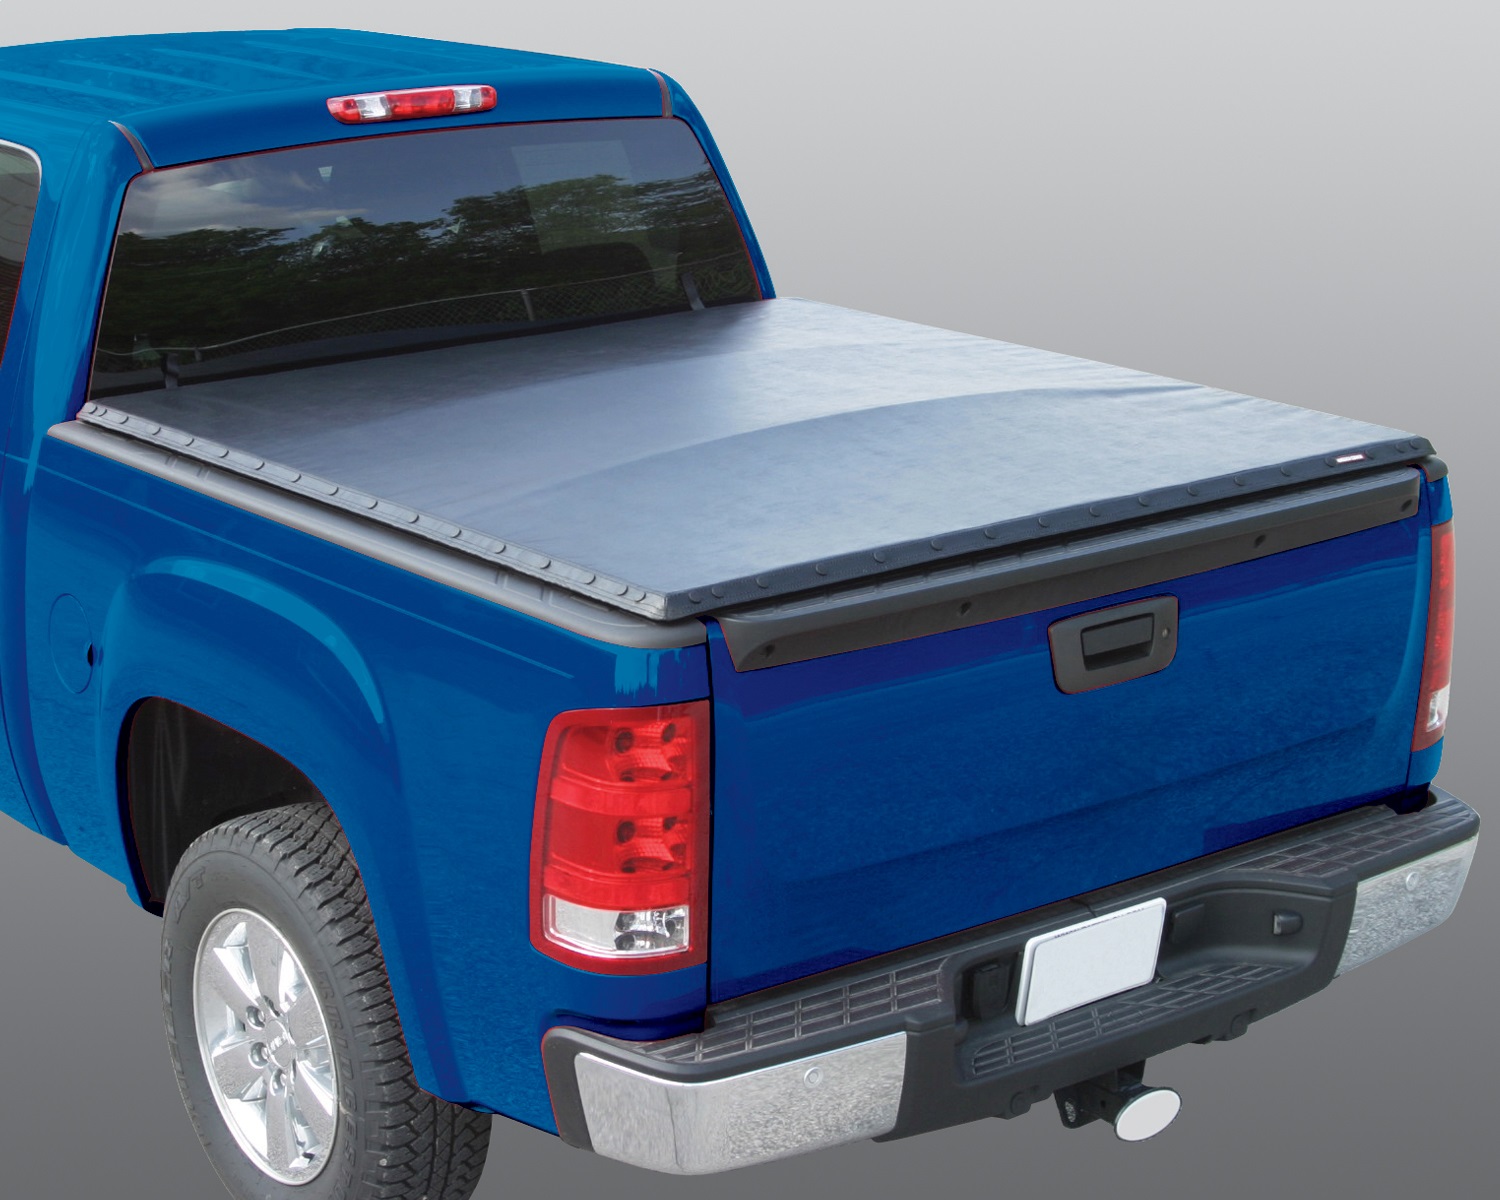 Rugged Liner Rugged Liner SN-D5509 Rugged Cover; Tonneau Cover Fits 09-13 1500 Ram 1500